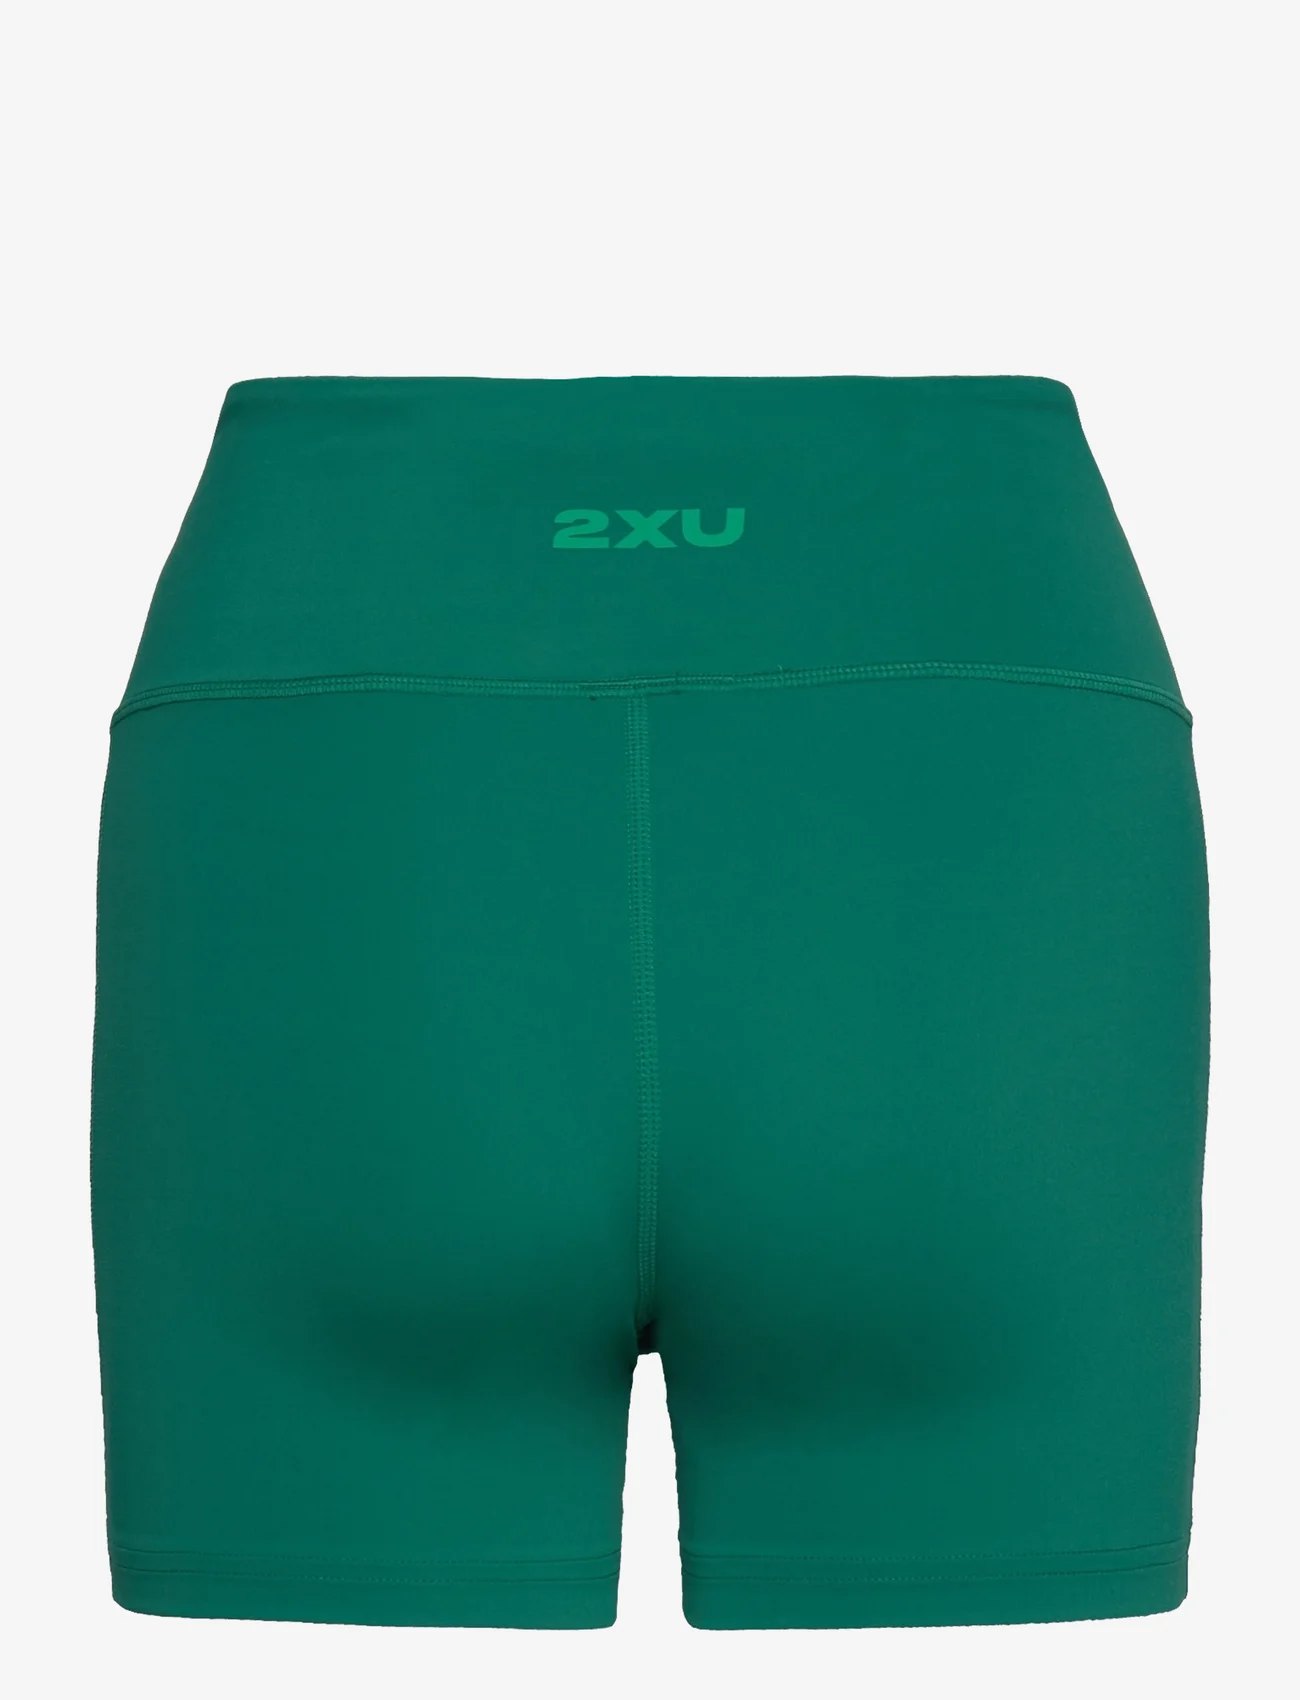 2XU - FORM HI-RISE COMP SHORTS - cykelshorts - forest green/forest green - 1